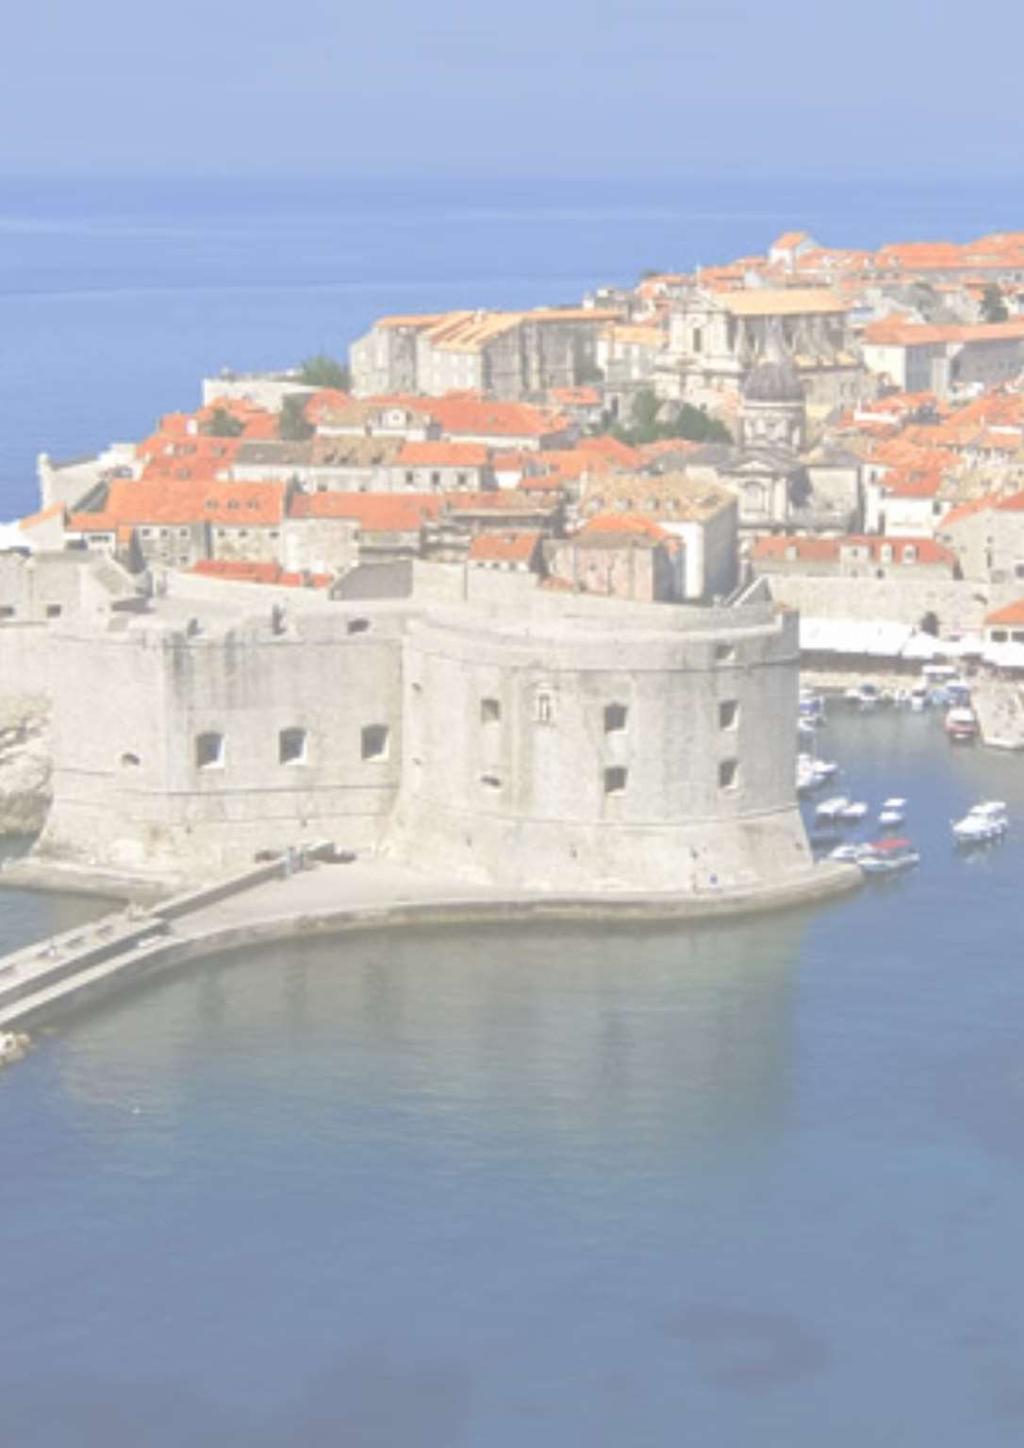 Chapter 6 The Early Dubrovnik "The Pearl of Adriatic, as the city of Dubrovnik is today referred to, began its development in the first half of the 7th century AD.